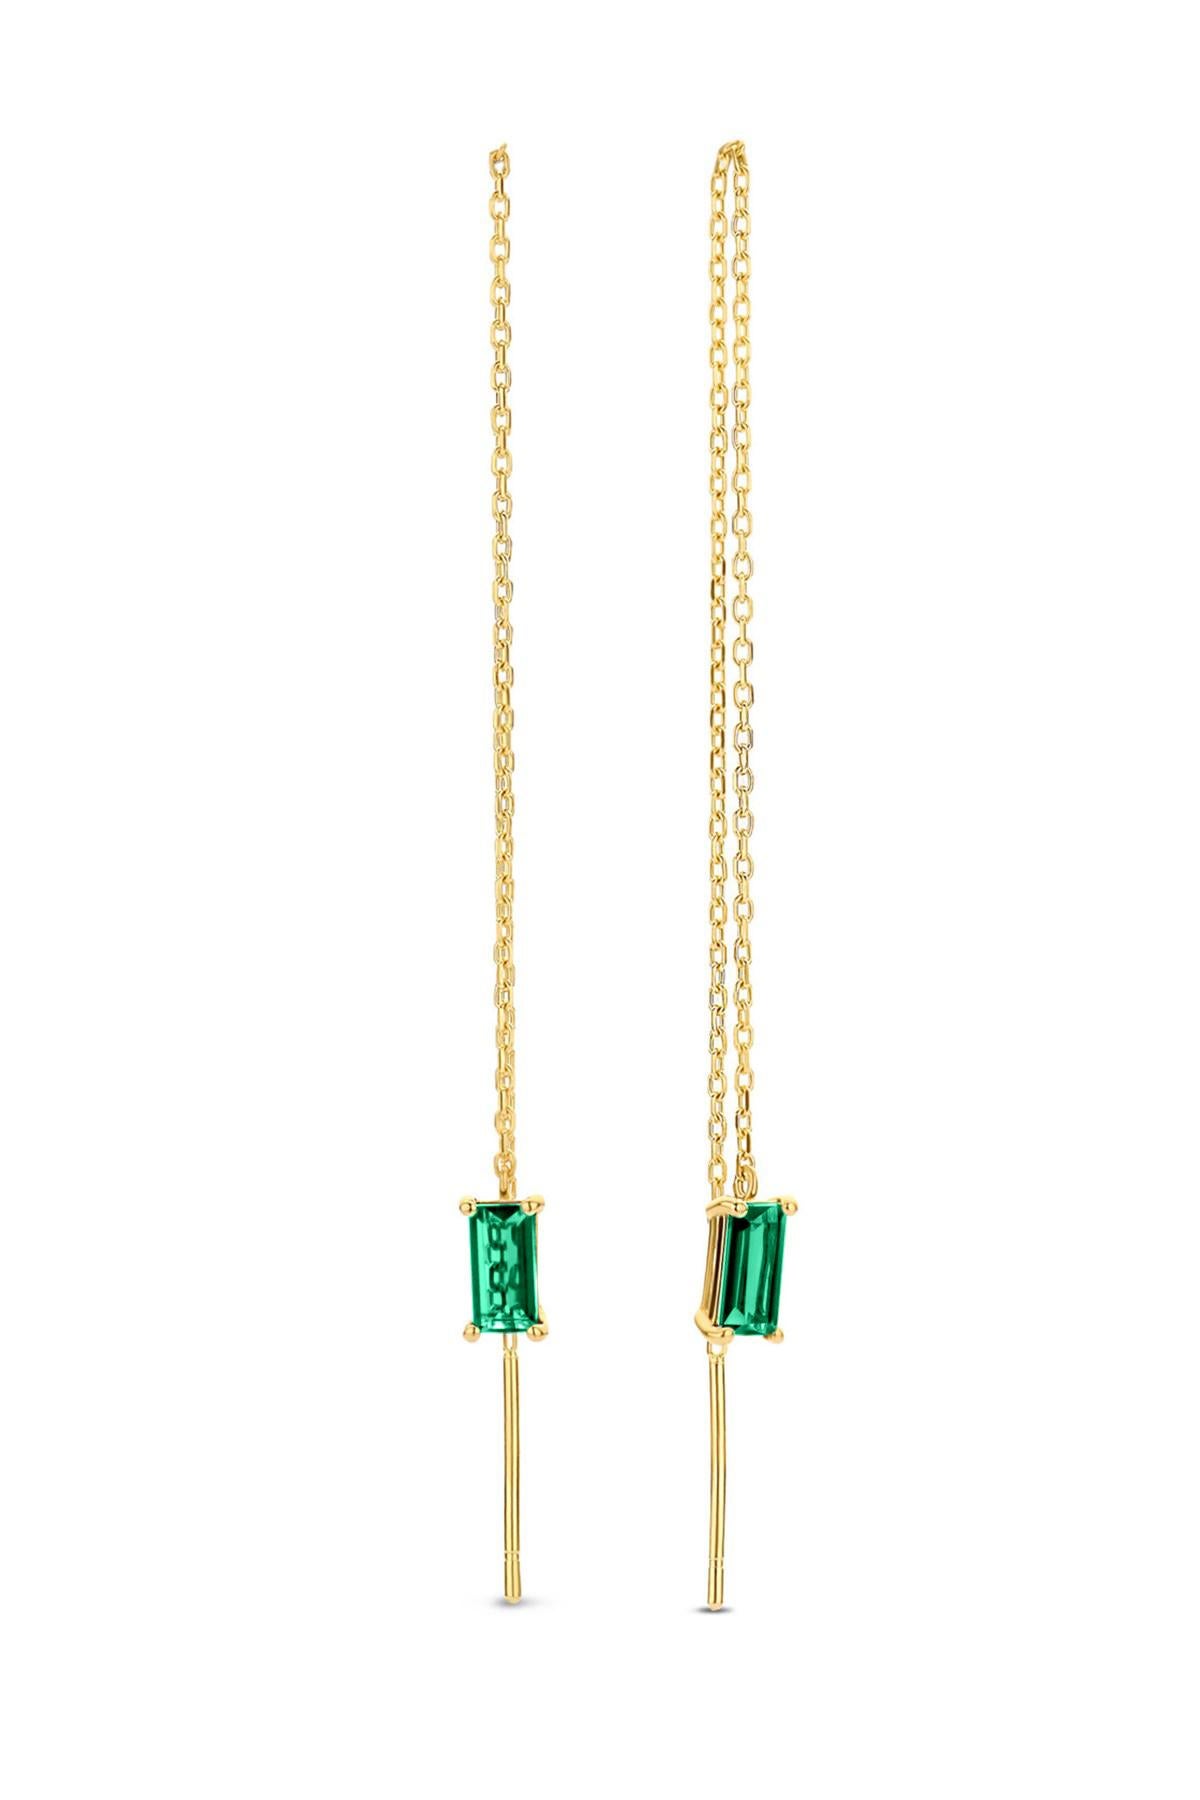 14k Solid Gold Drop Earrings with Emeralds, Chain Gold Earrings For Sale 6